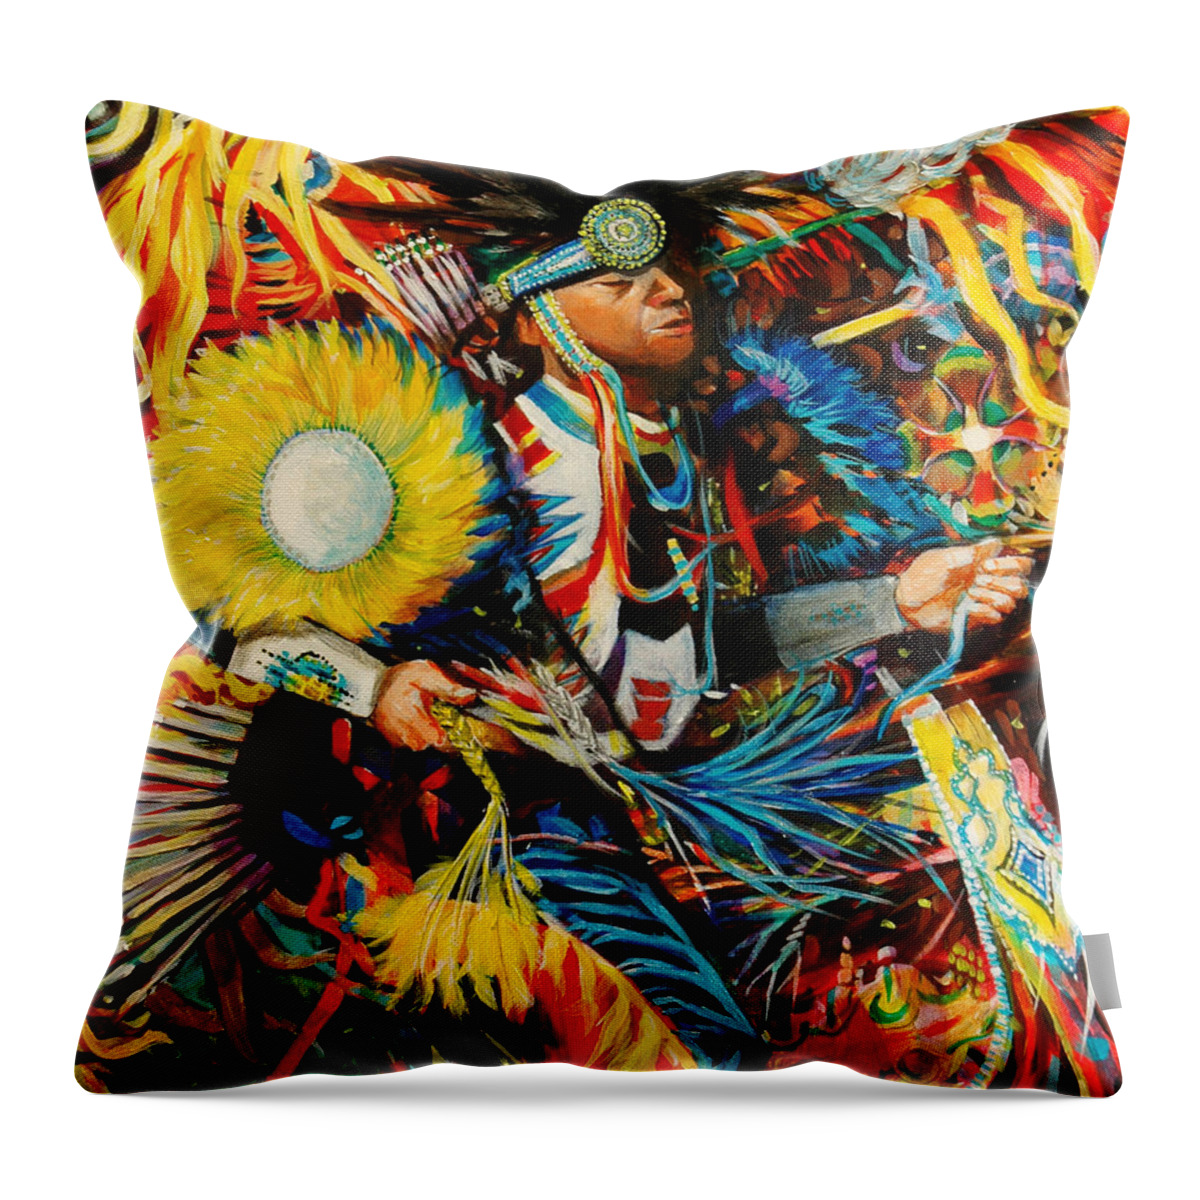 Pow Wow Throw Pillow featuring the painting Pow Wow Dancer by Cynthia Westbrook